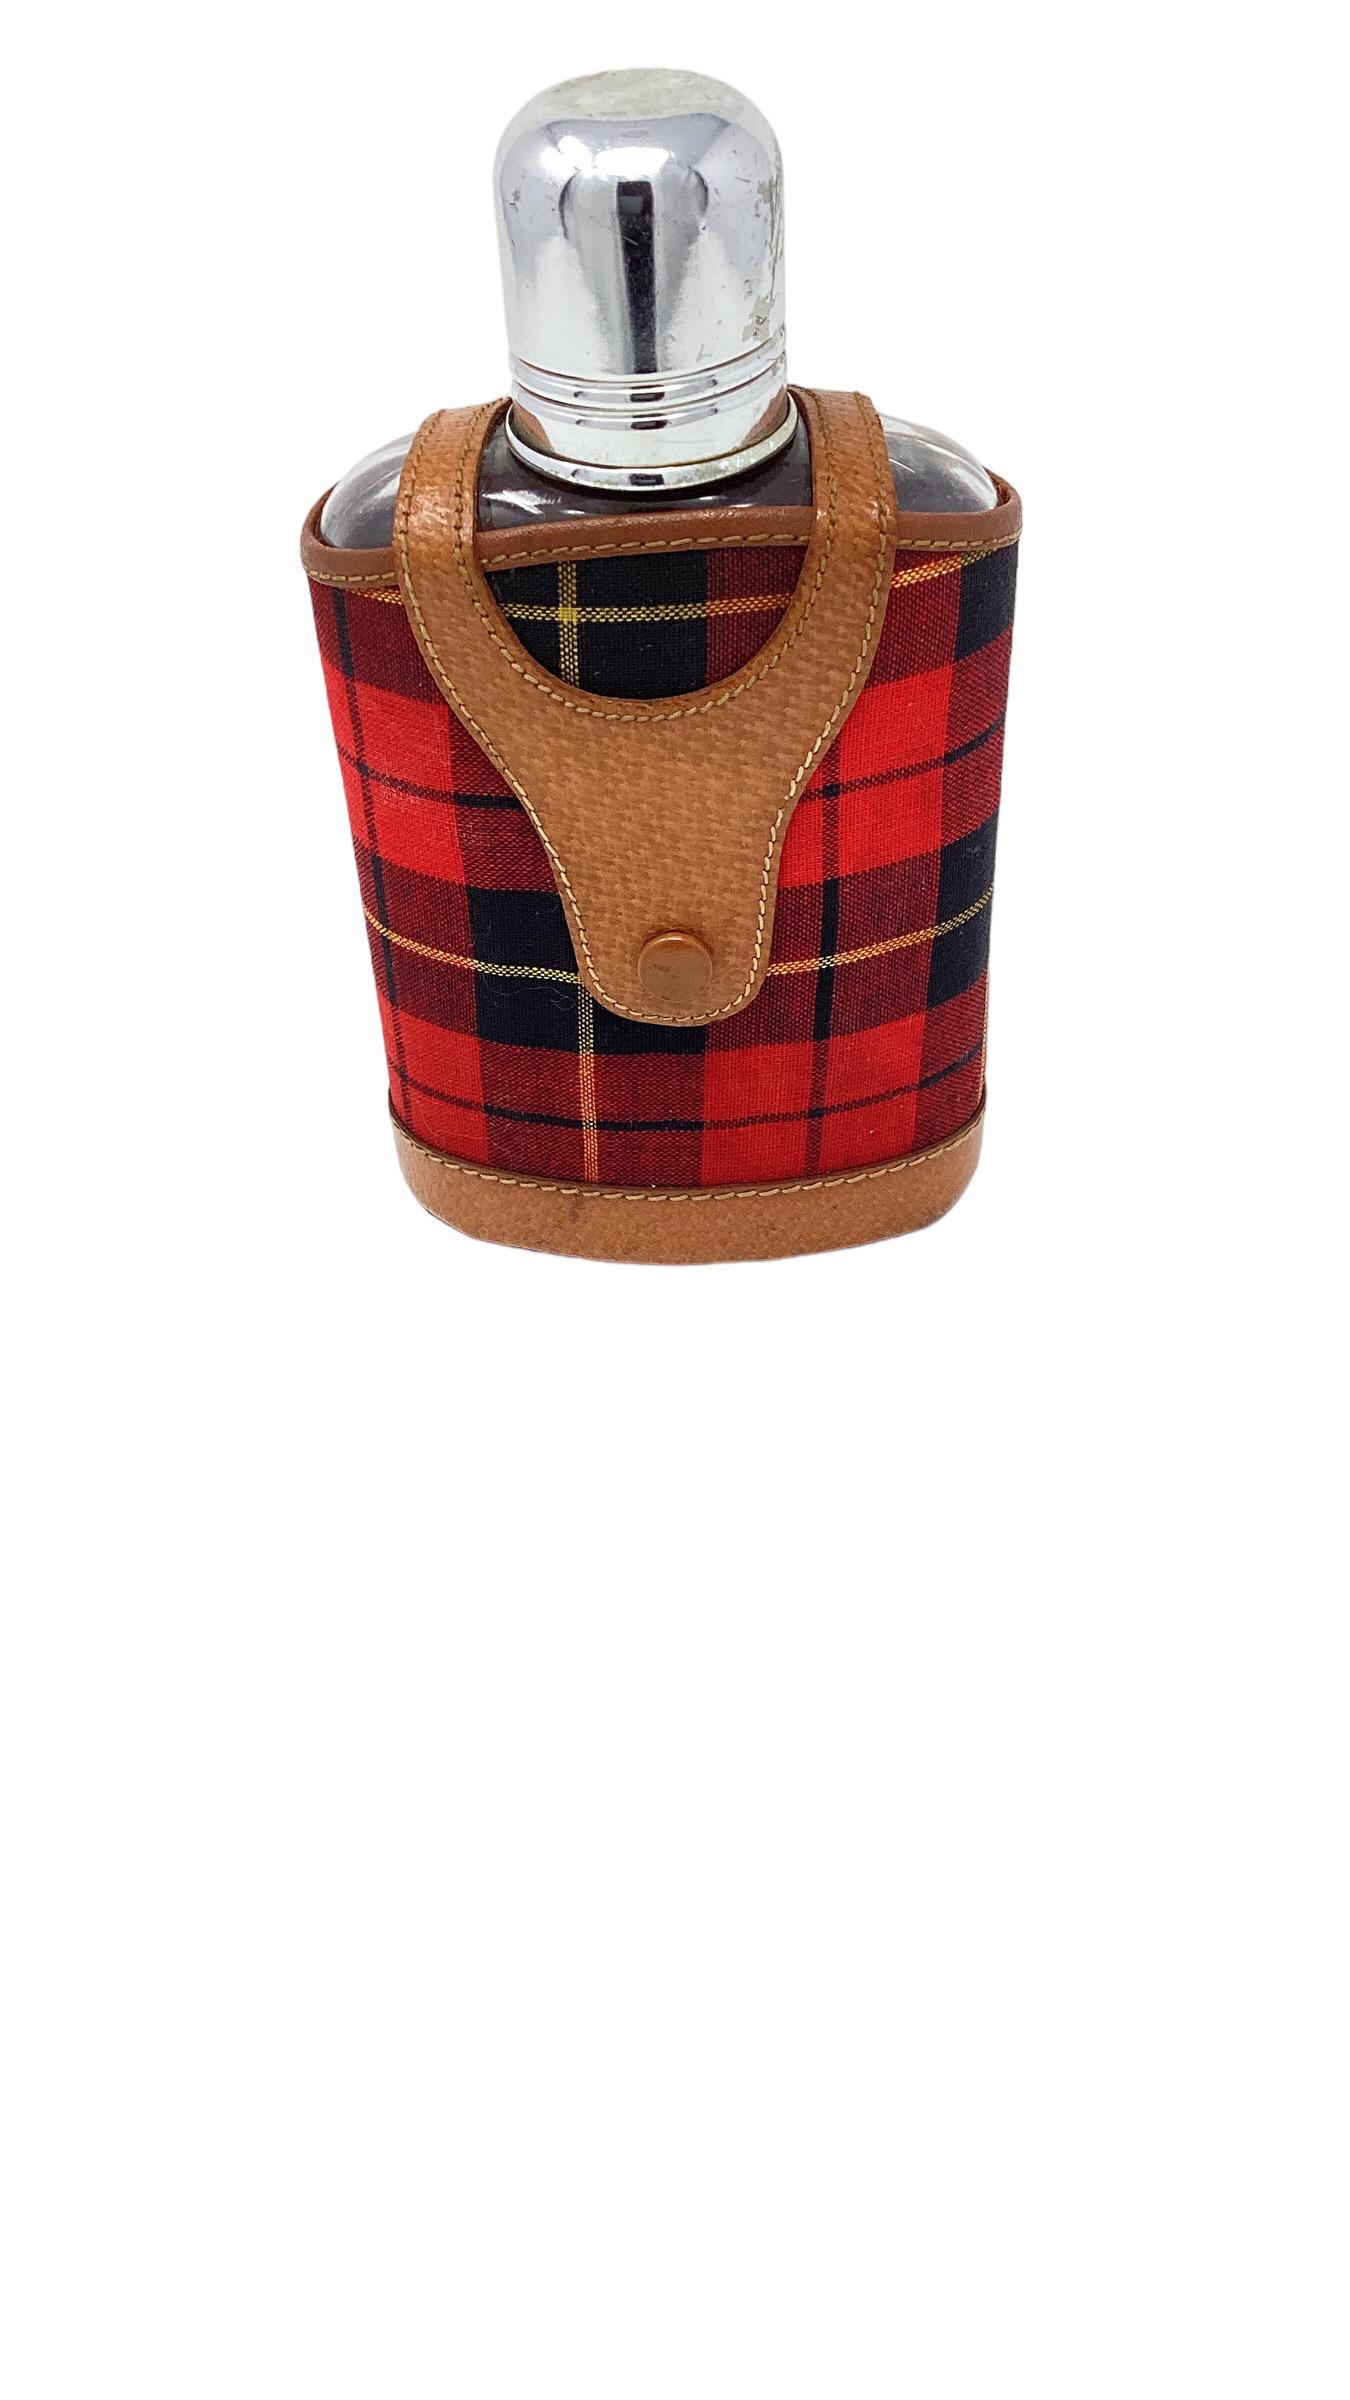 Vintage Hip Flask with Tartan and Leather Cover. Vibrantly colored tartan plaid with supple hand stitched pigskin leather wrap around the glass flask.